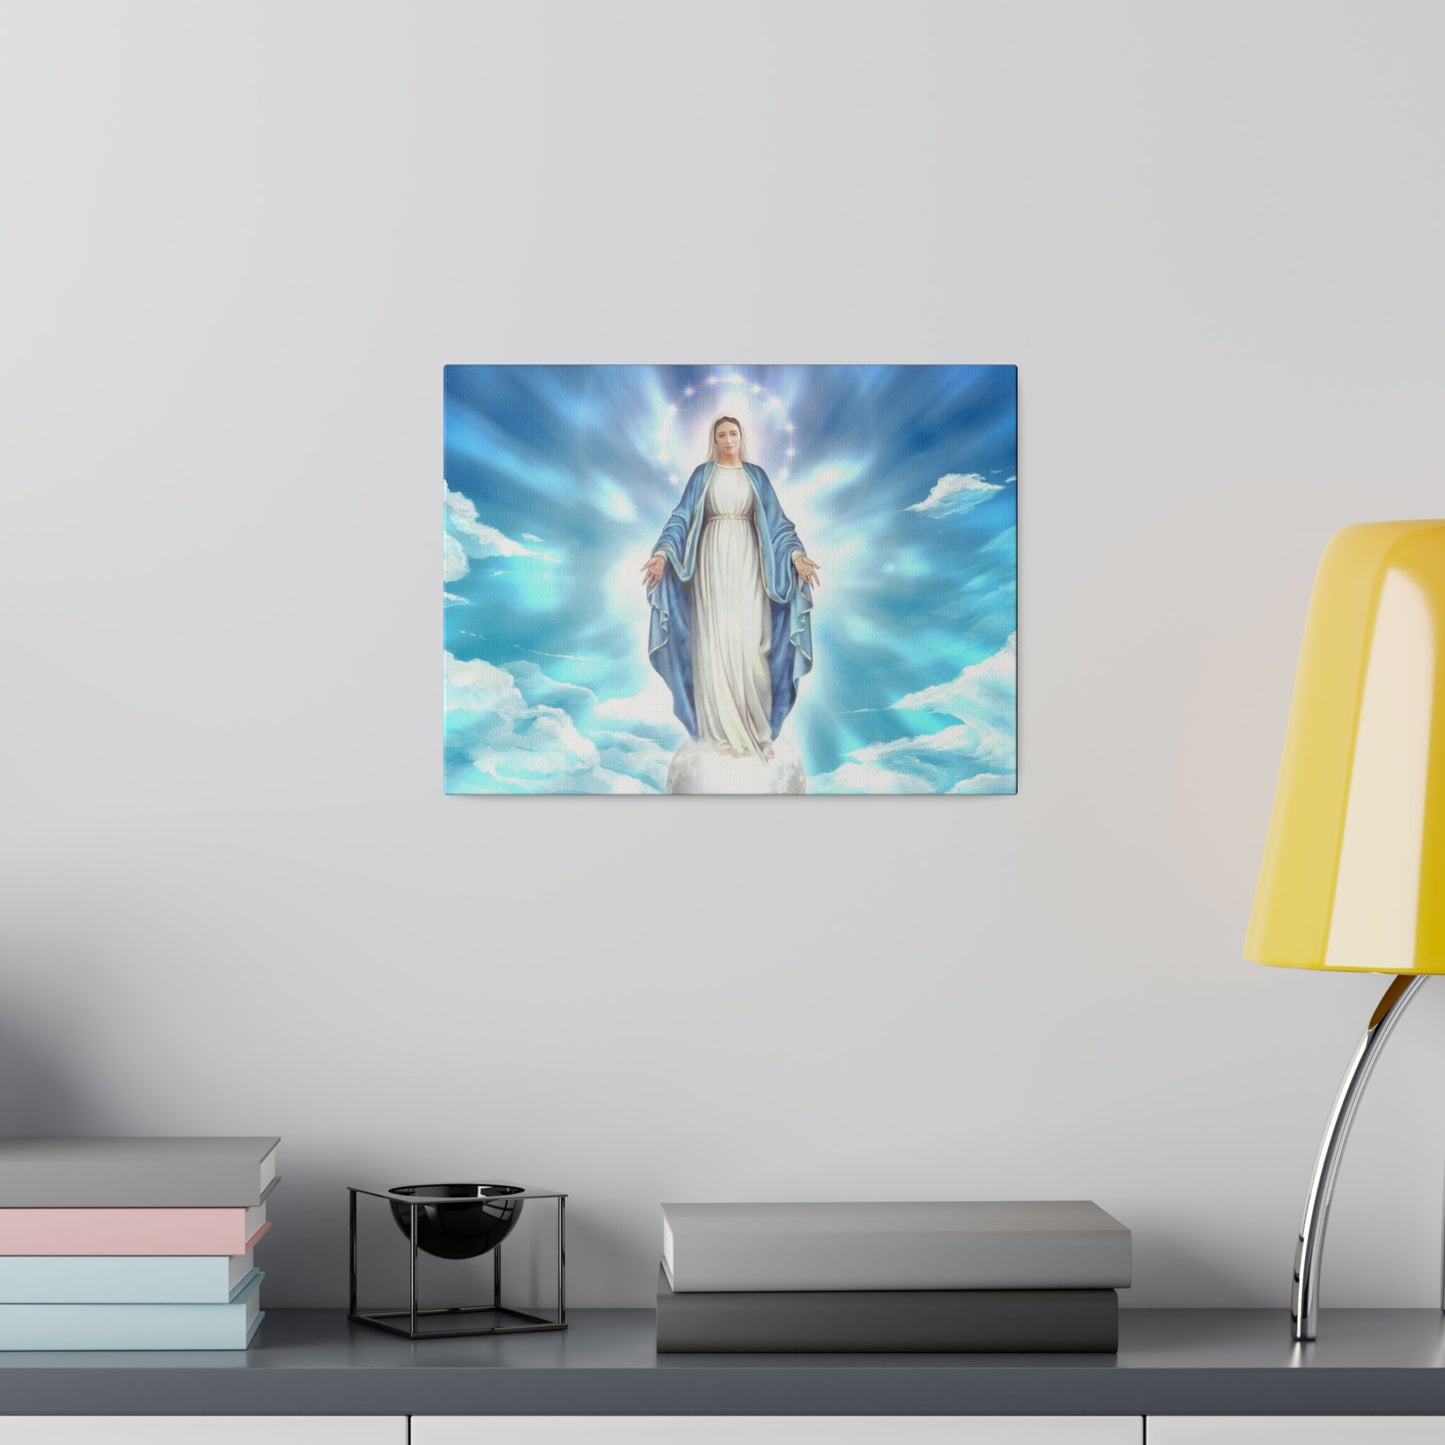 Our Lady of the Immaculate Conception Canvas Print - Catholic Religious Art Decor - Virgin Mary Wall Art - Christian Devotional Home Decor